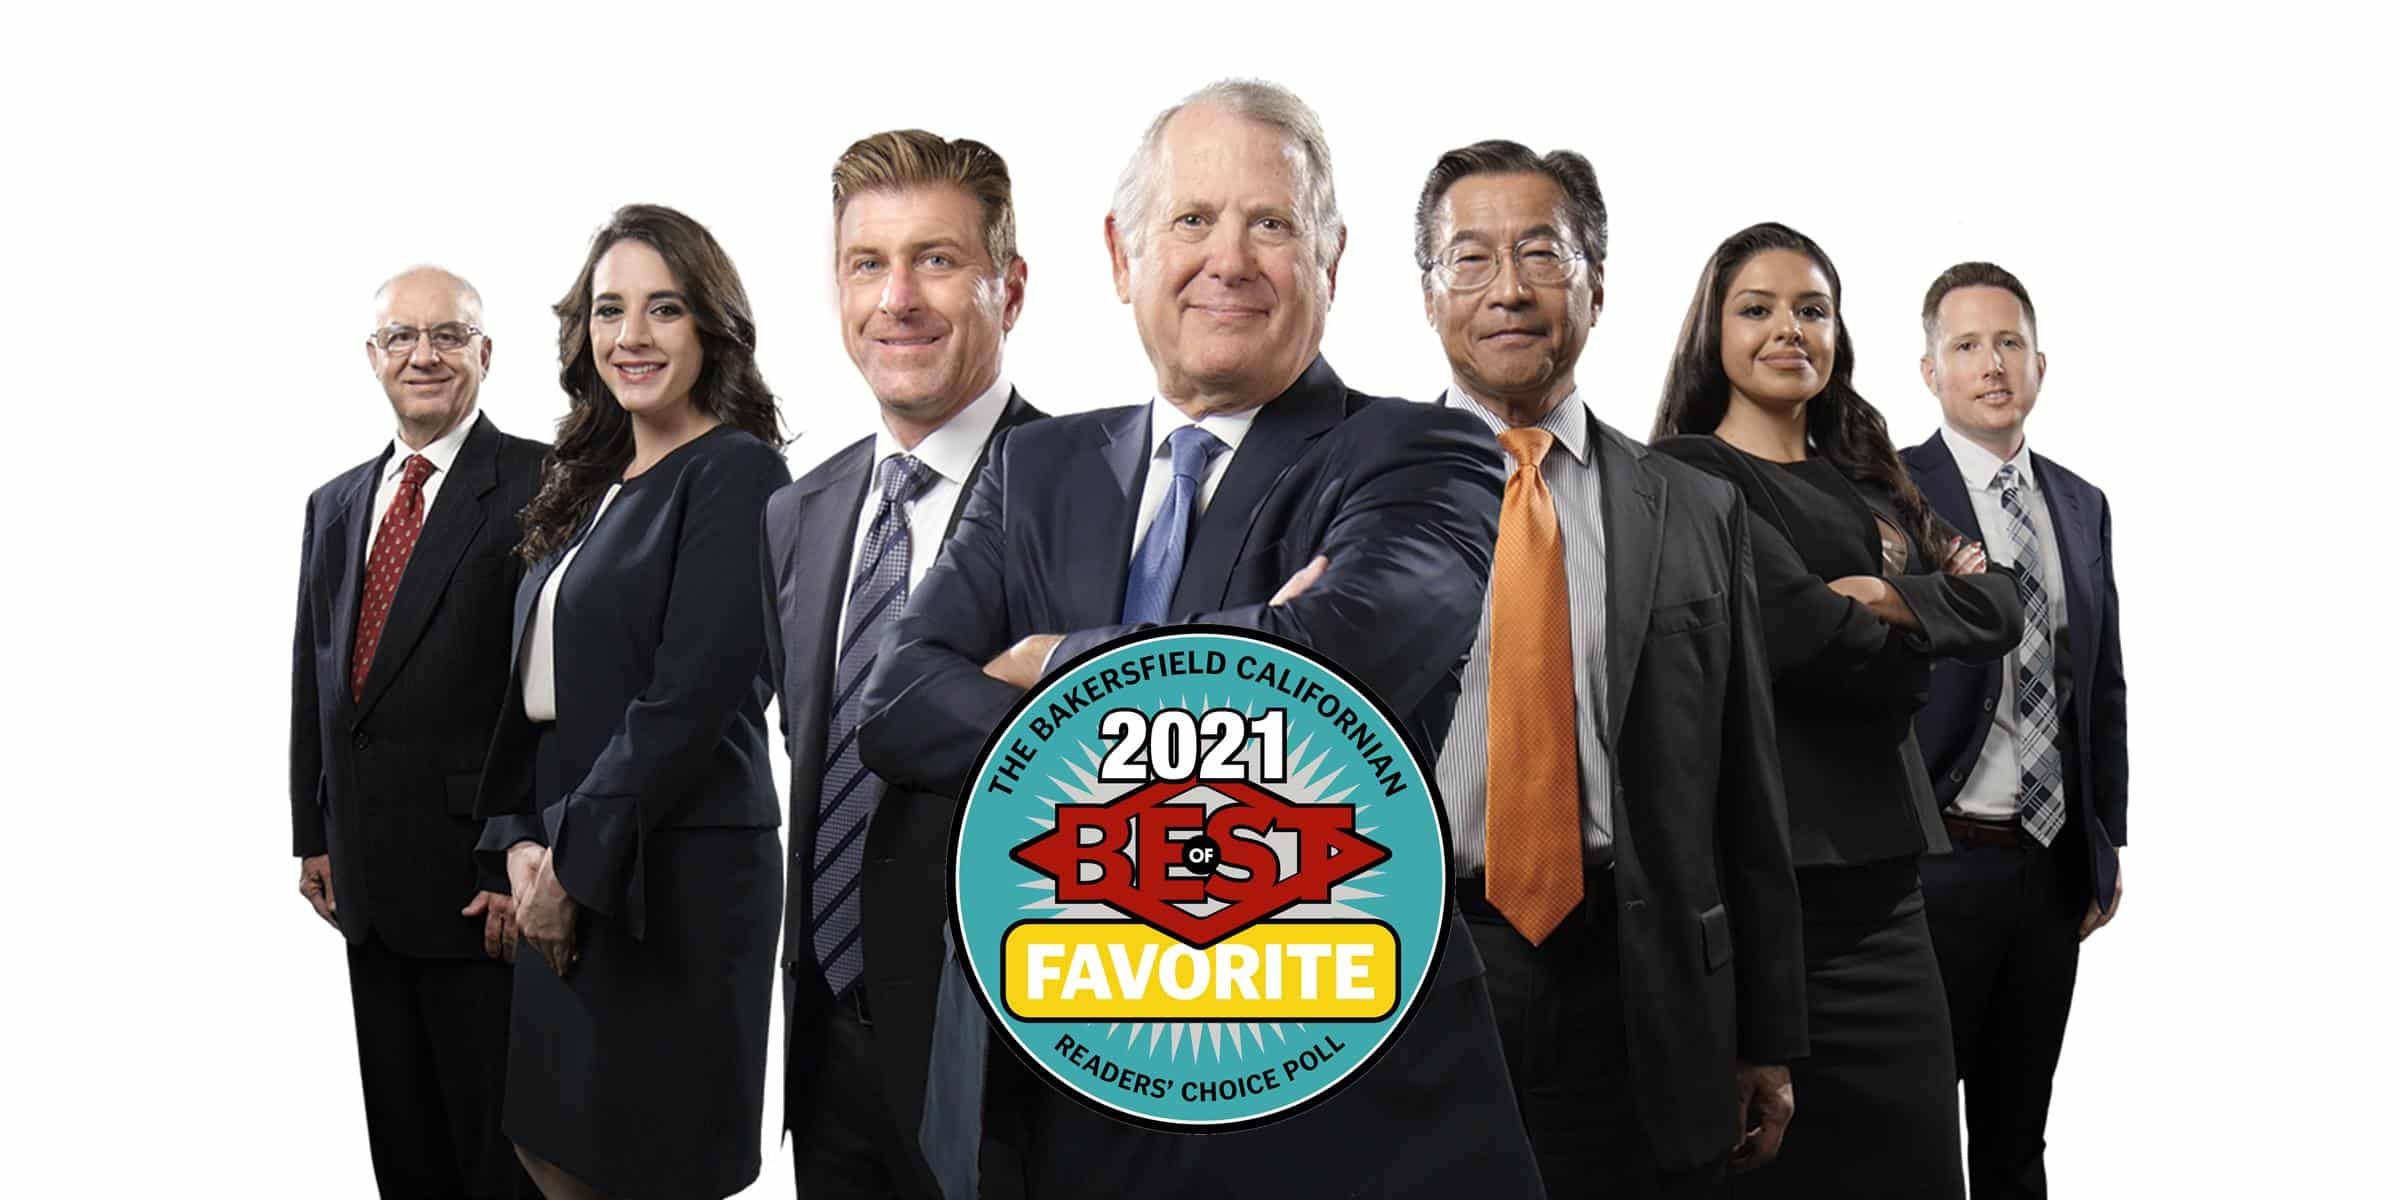 Chain | Cohn | Clark Selected in 2021 ‘Best of Kern County’ Poll (Best Lawyer / Best Law Firm / Best Business)